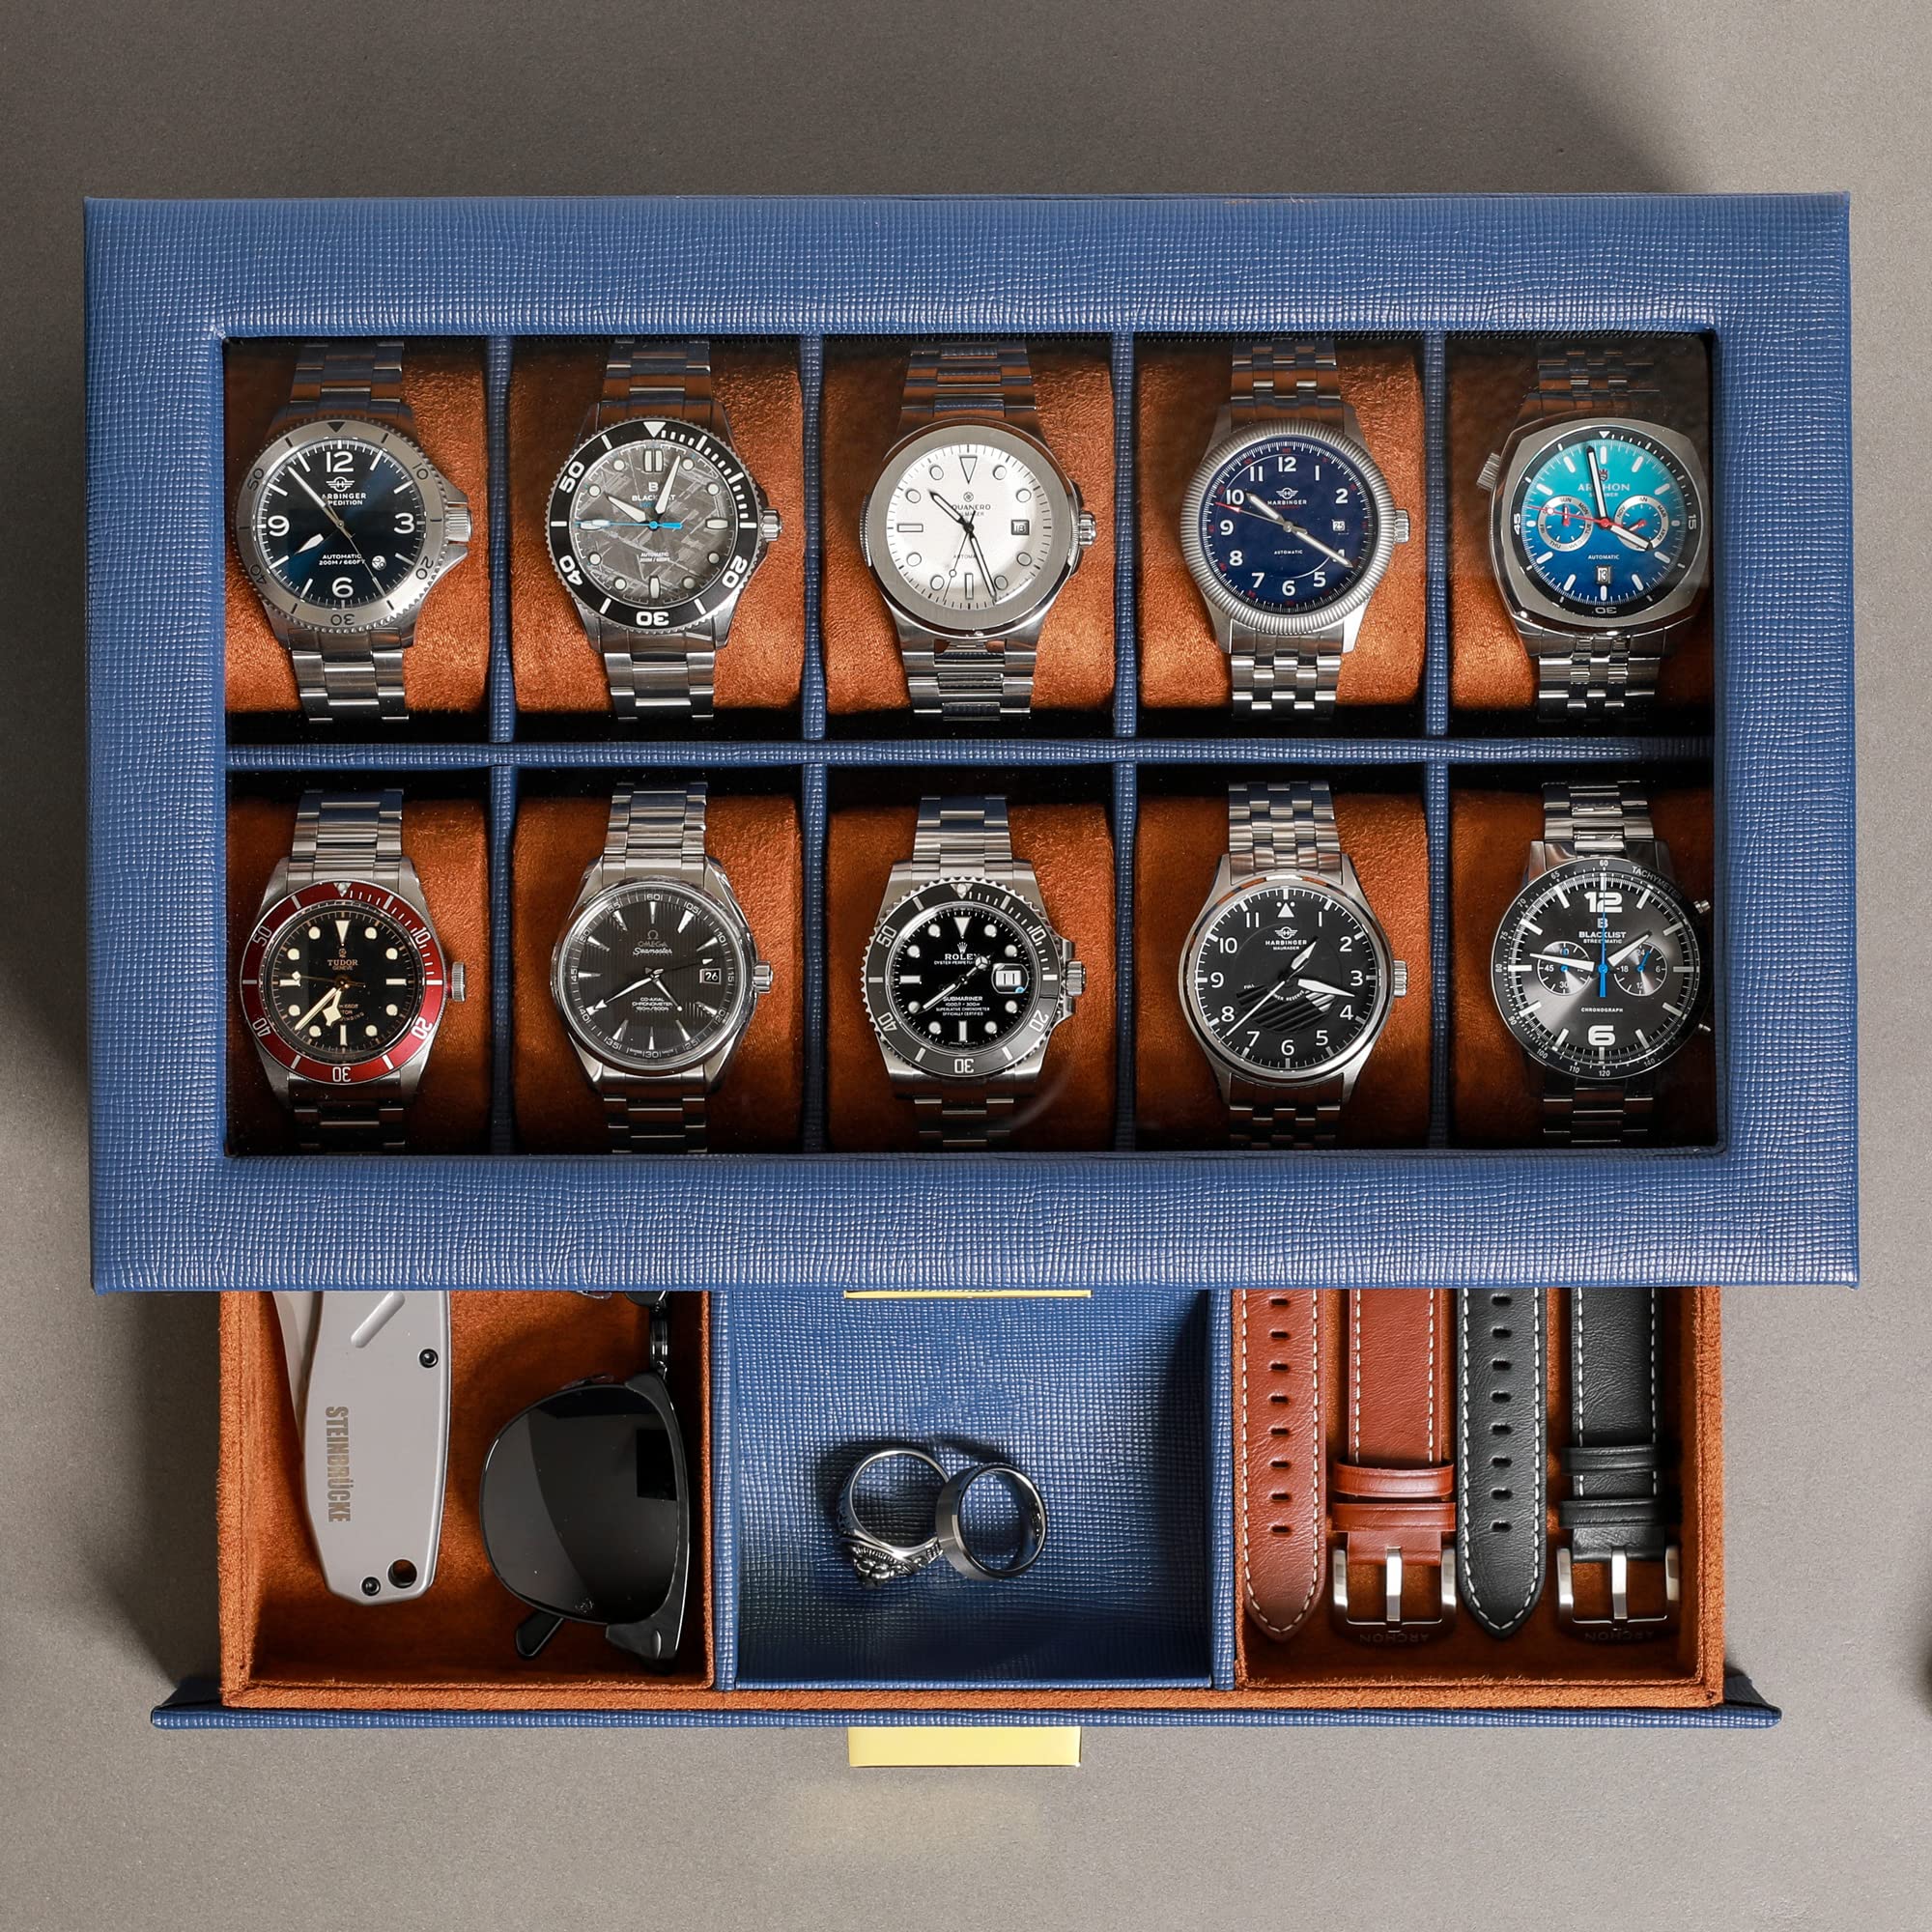 10 Slot Leather Watch Box with Matching 3 Slot Watch Roll - Luxury Watch Case Display Organizer Microsuede Liner, Locking Mens Jewelry Watches Holder, Men's Storage Boxes Holder Glass Top Blue/Tan